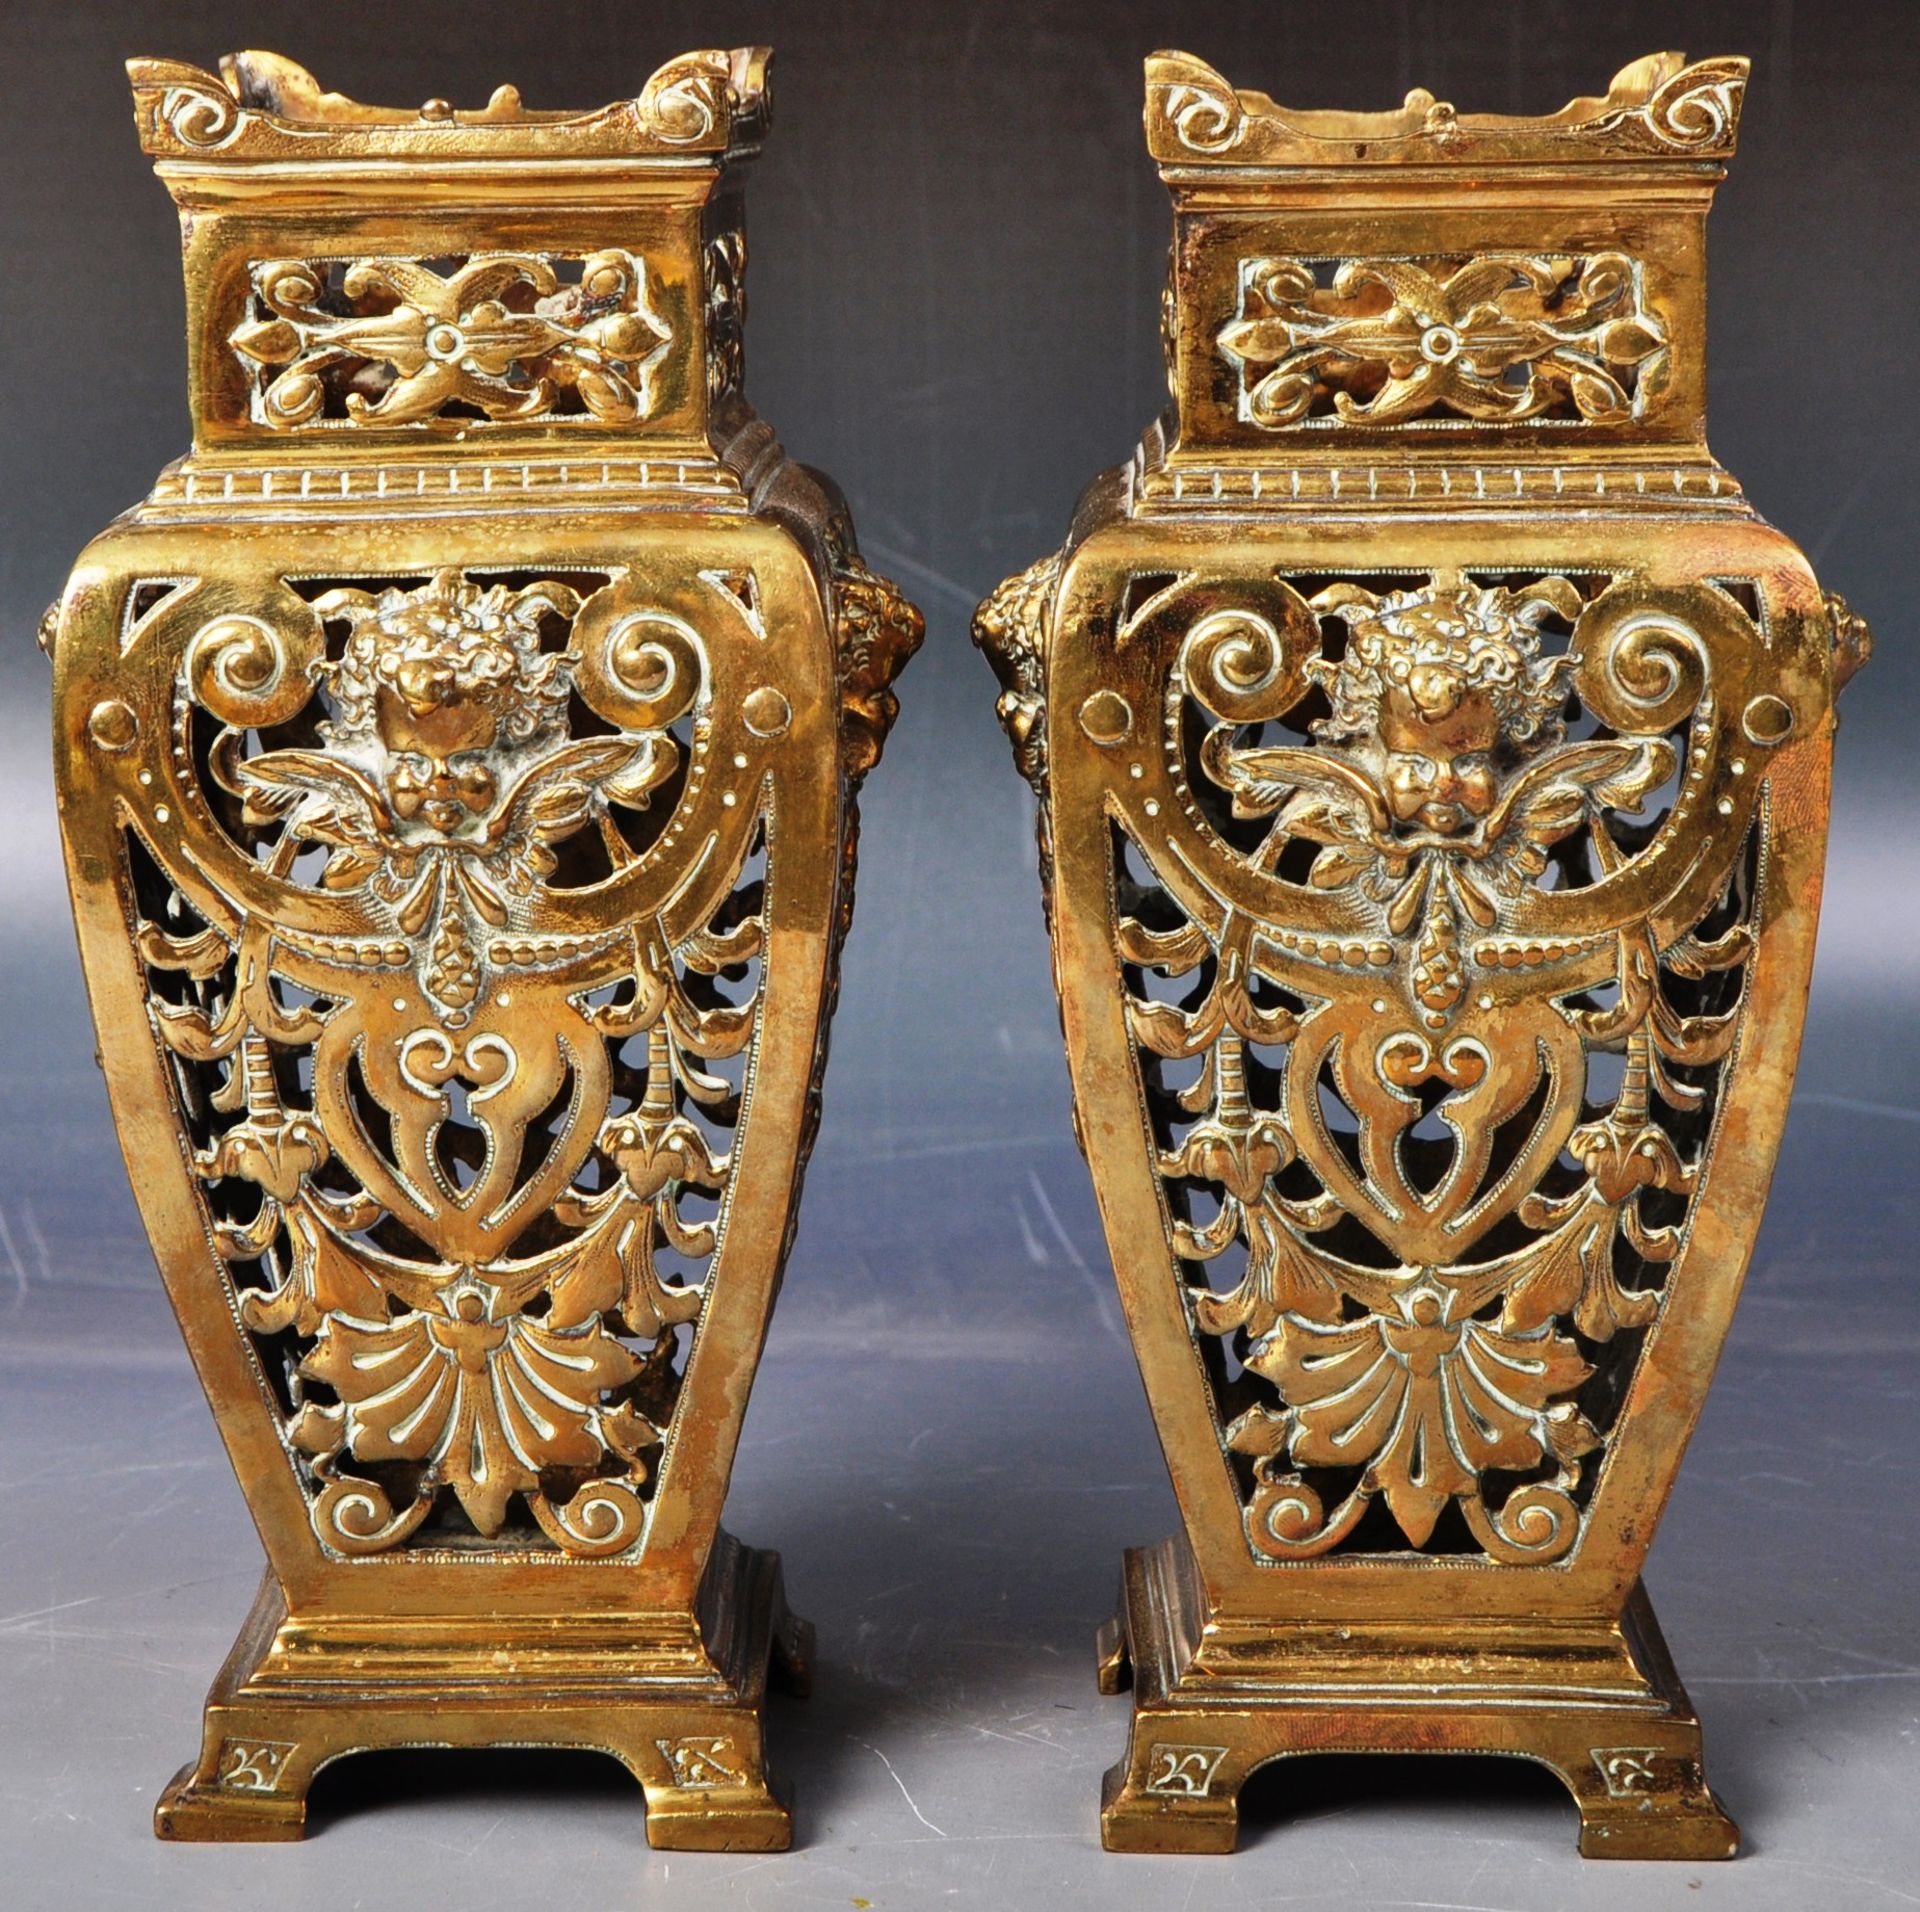 PAIR OF 19TH CENTURY VICTORIAN NEOCLASSICAL BRASS VASES - Image 5 of 6